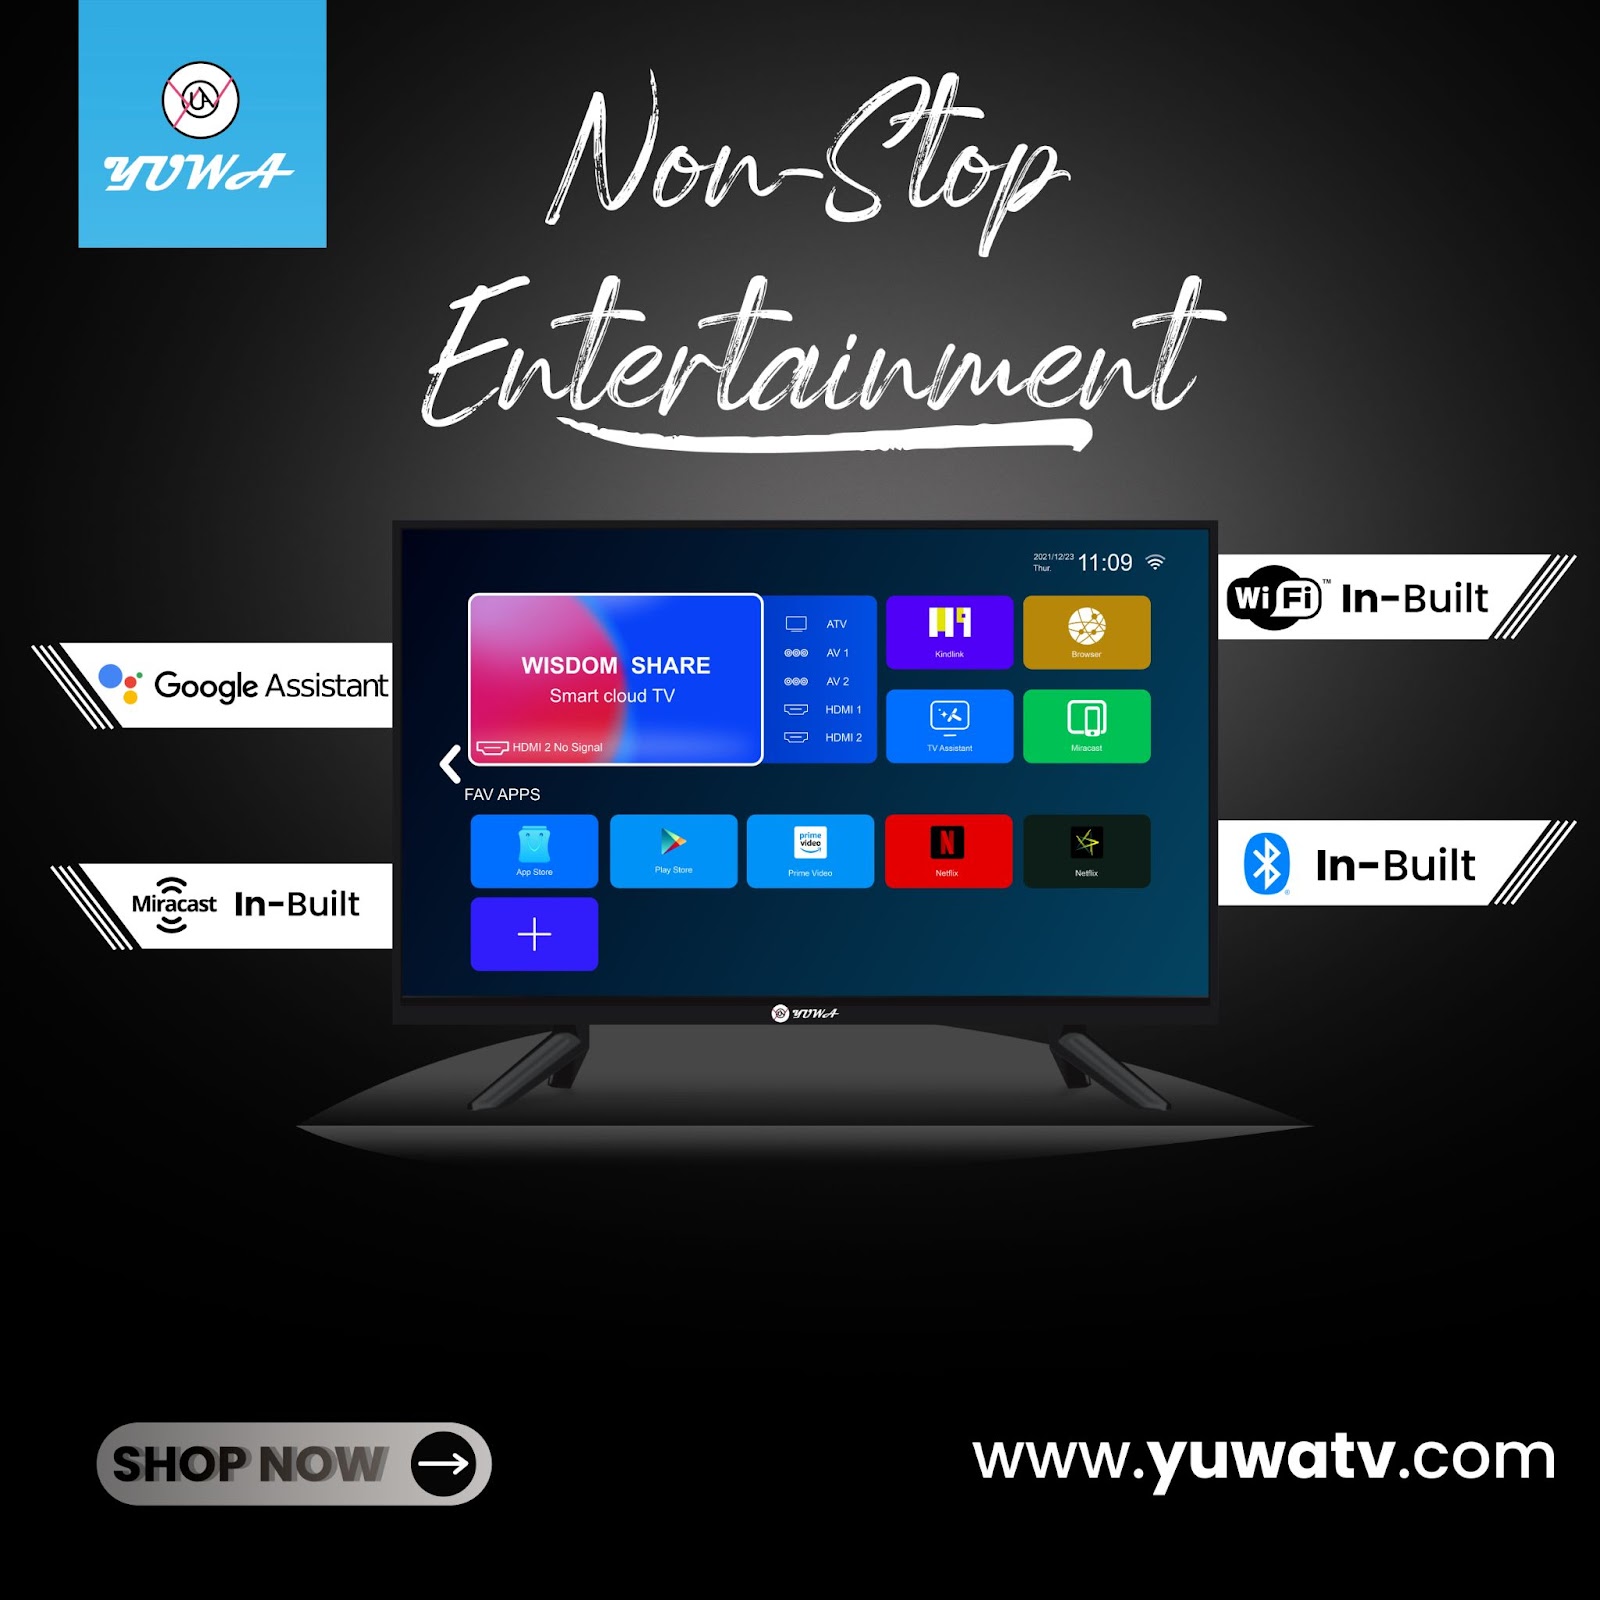 Best Smart Tv in India
LED Tv Companies in India
Best Smart LED TV in Noida
LED TV Manufacturers
Android Television Manufacturers
TV Manufacturers in India
LED TV Manufacturers in Delhi NCR